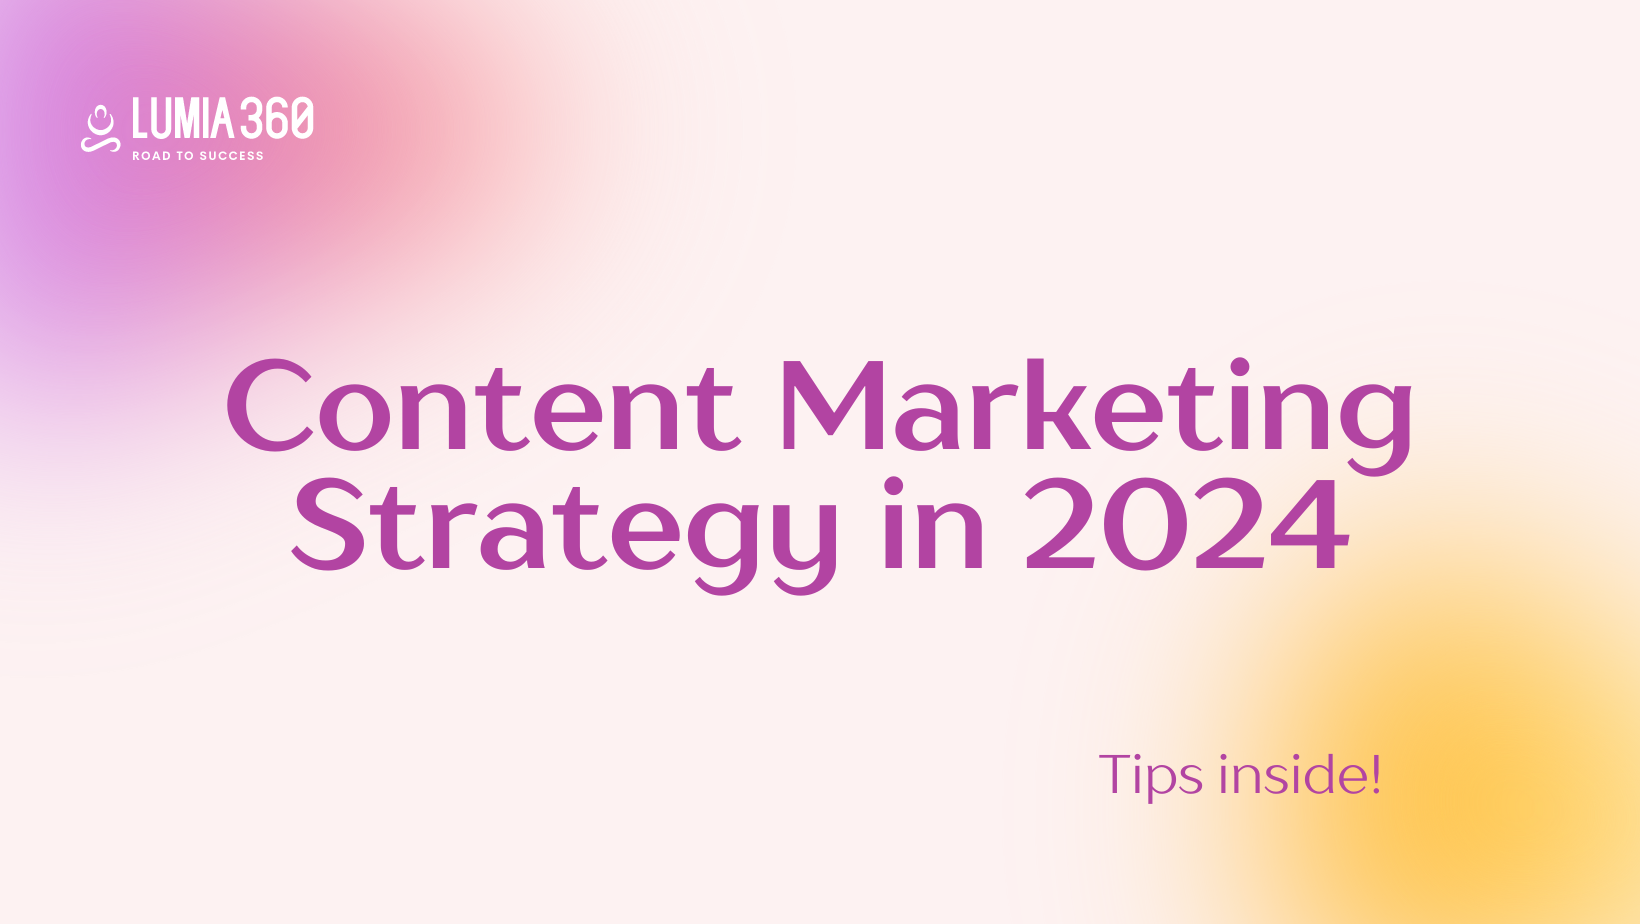 Content Marketing Strategy in 2024